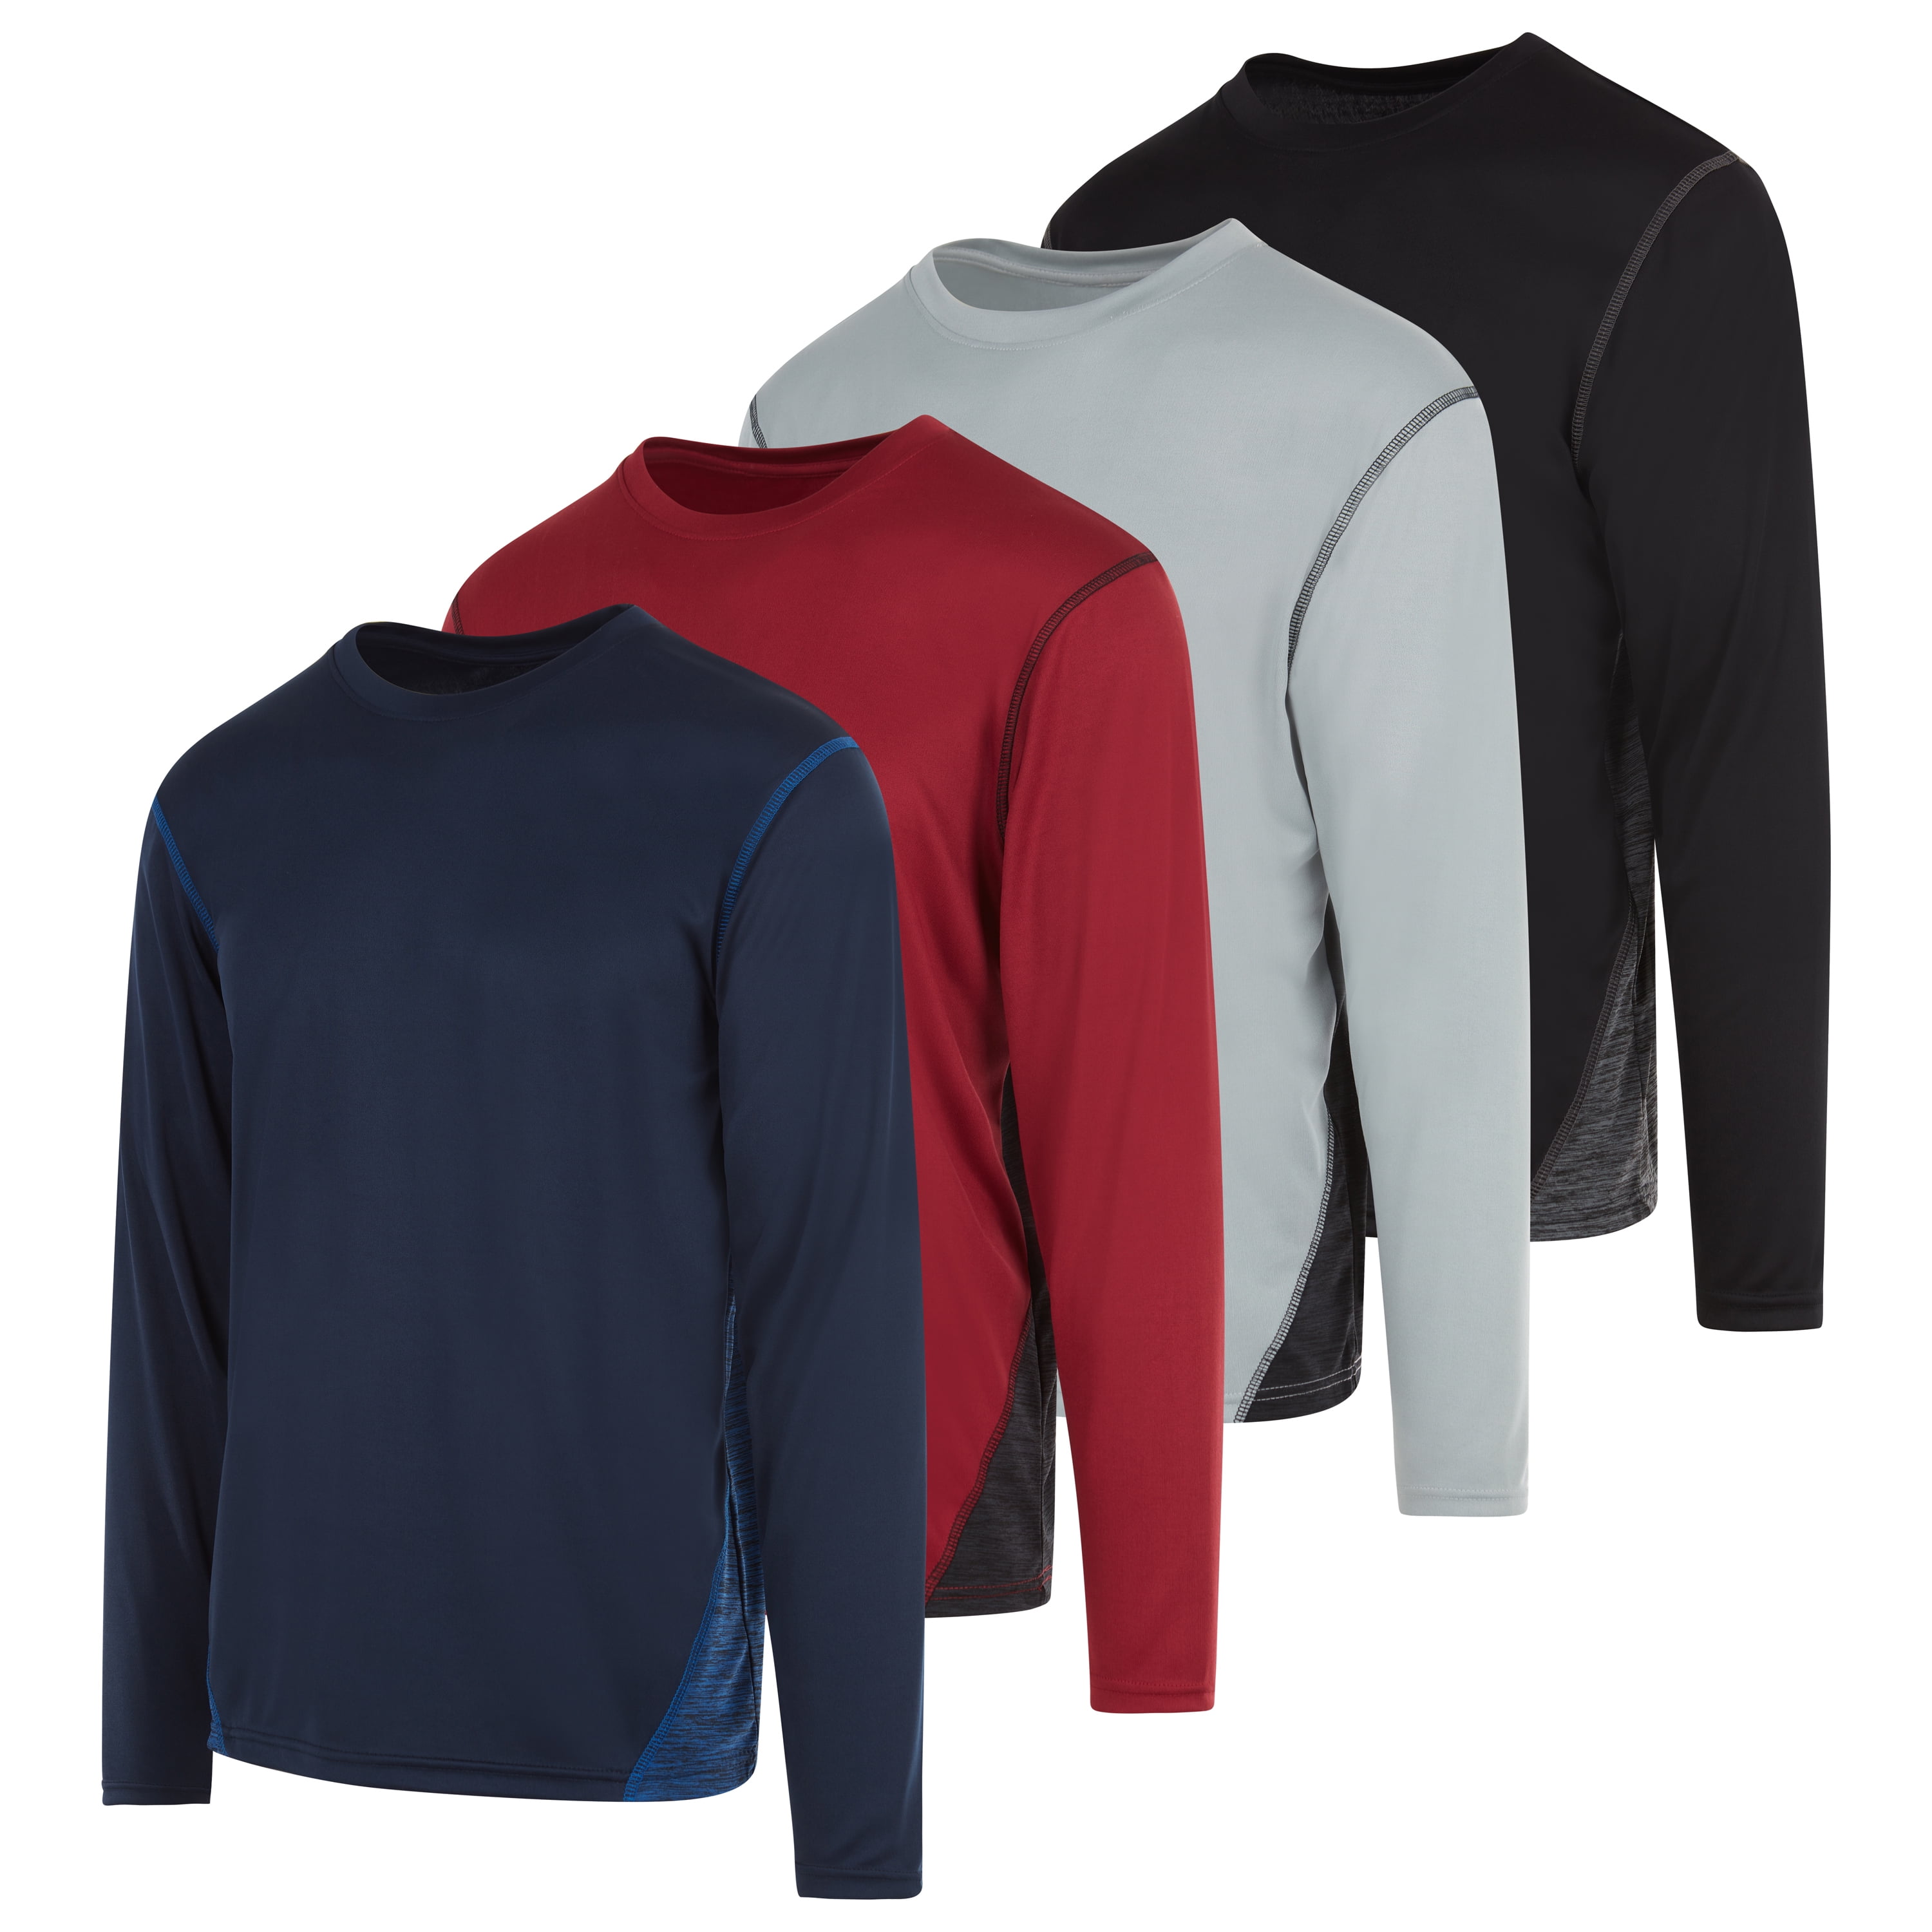 DARESAY Dri-Fit Long Sleeve T Shirts for Men-4 Pack- Moisture Wicking, Quick  Dry Tees (Up to 3XL) 